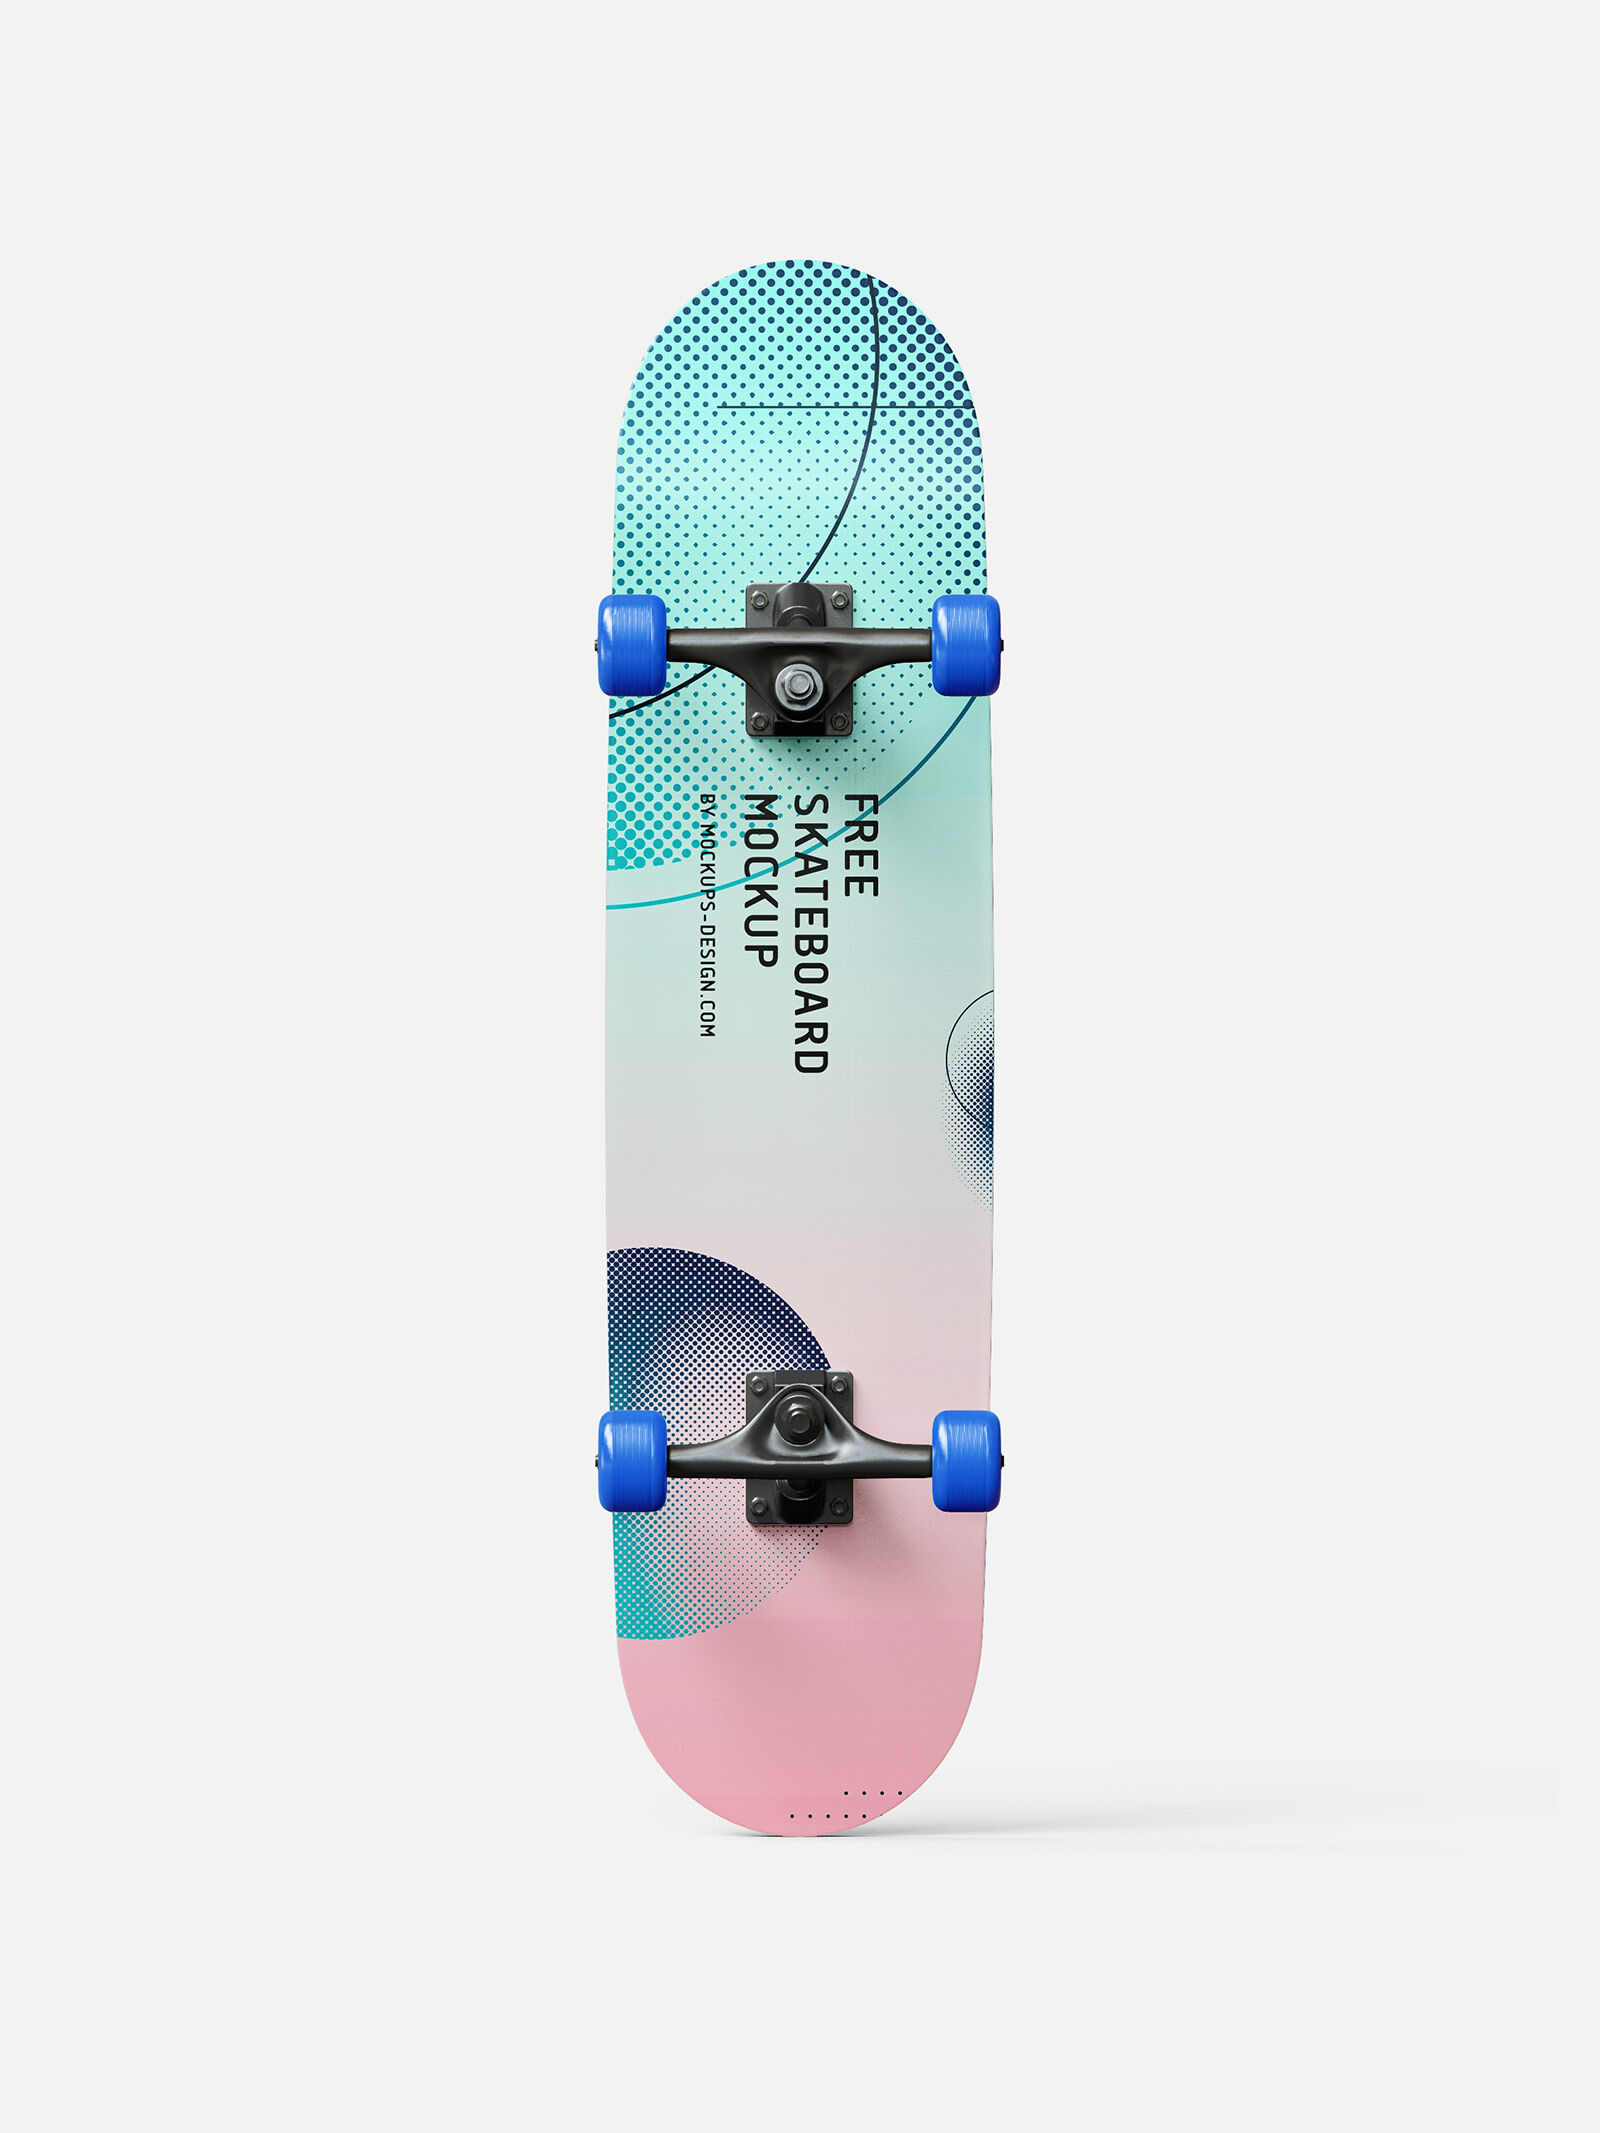 7 Mockups of Skateboards in the Perspective View FREE PSD